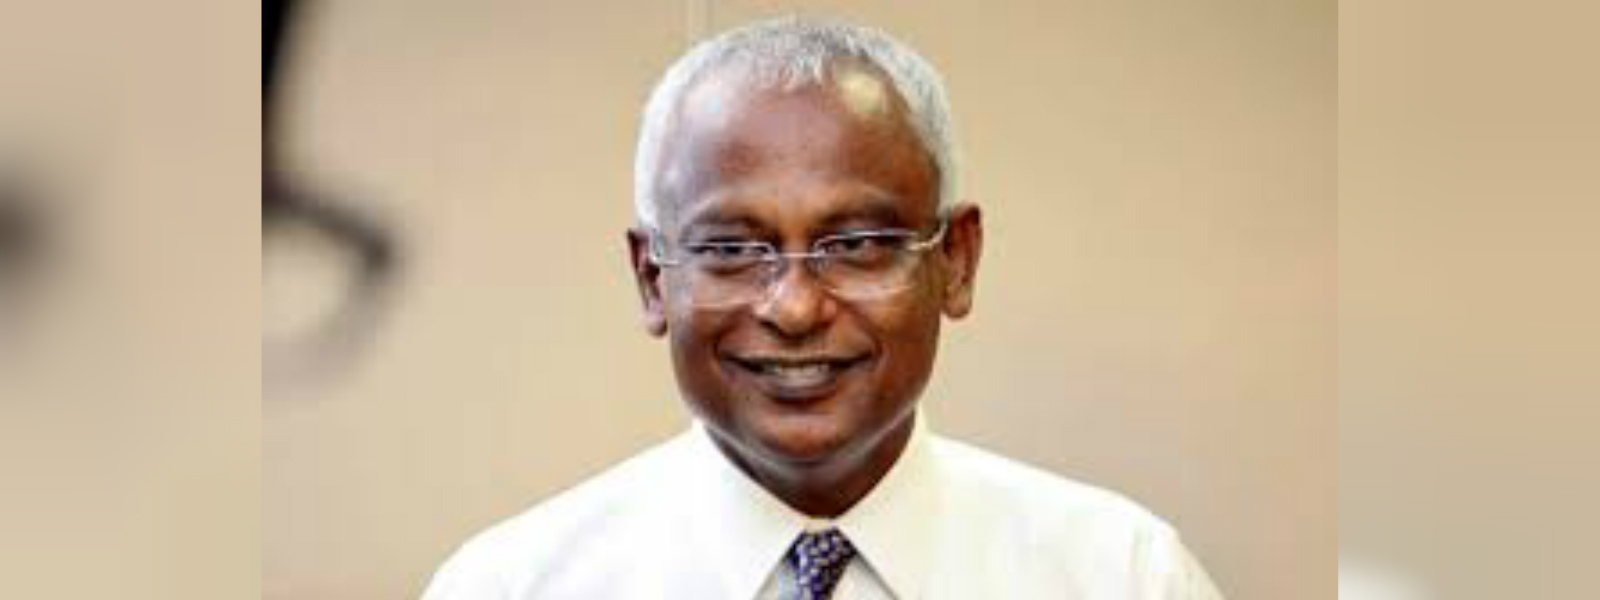 Maldivian President arrives at the country 